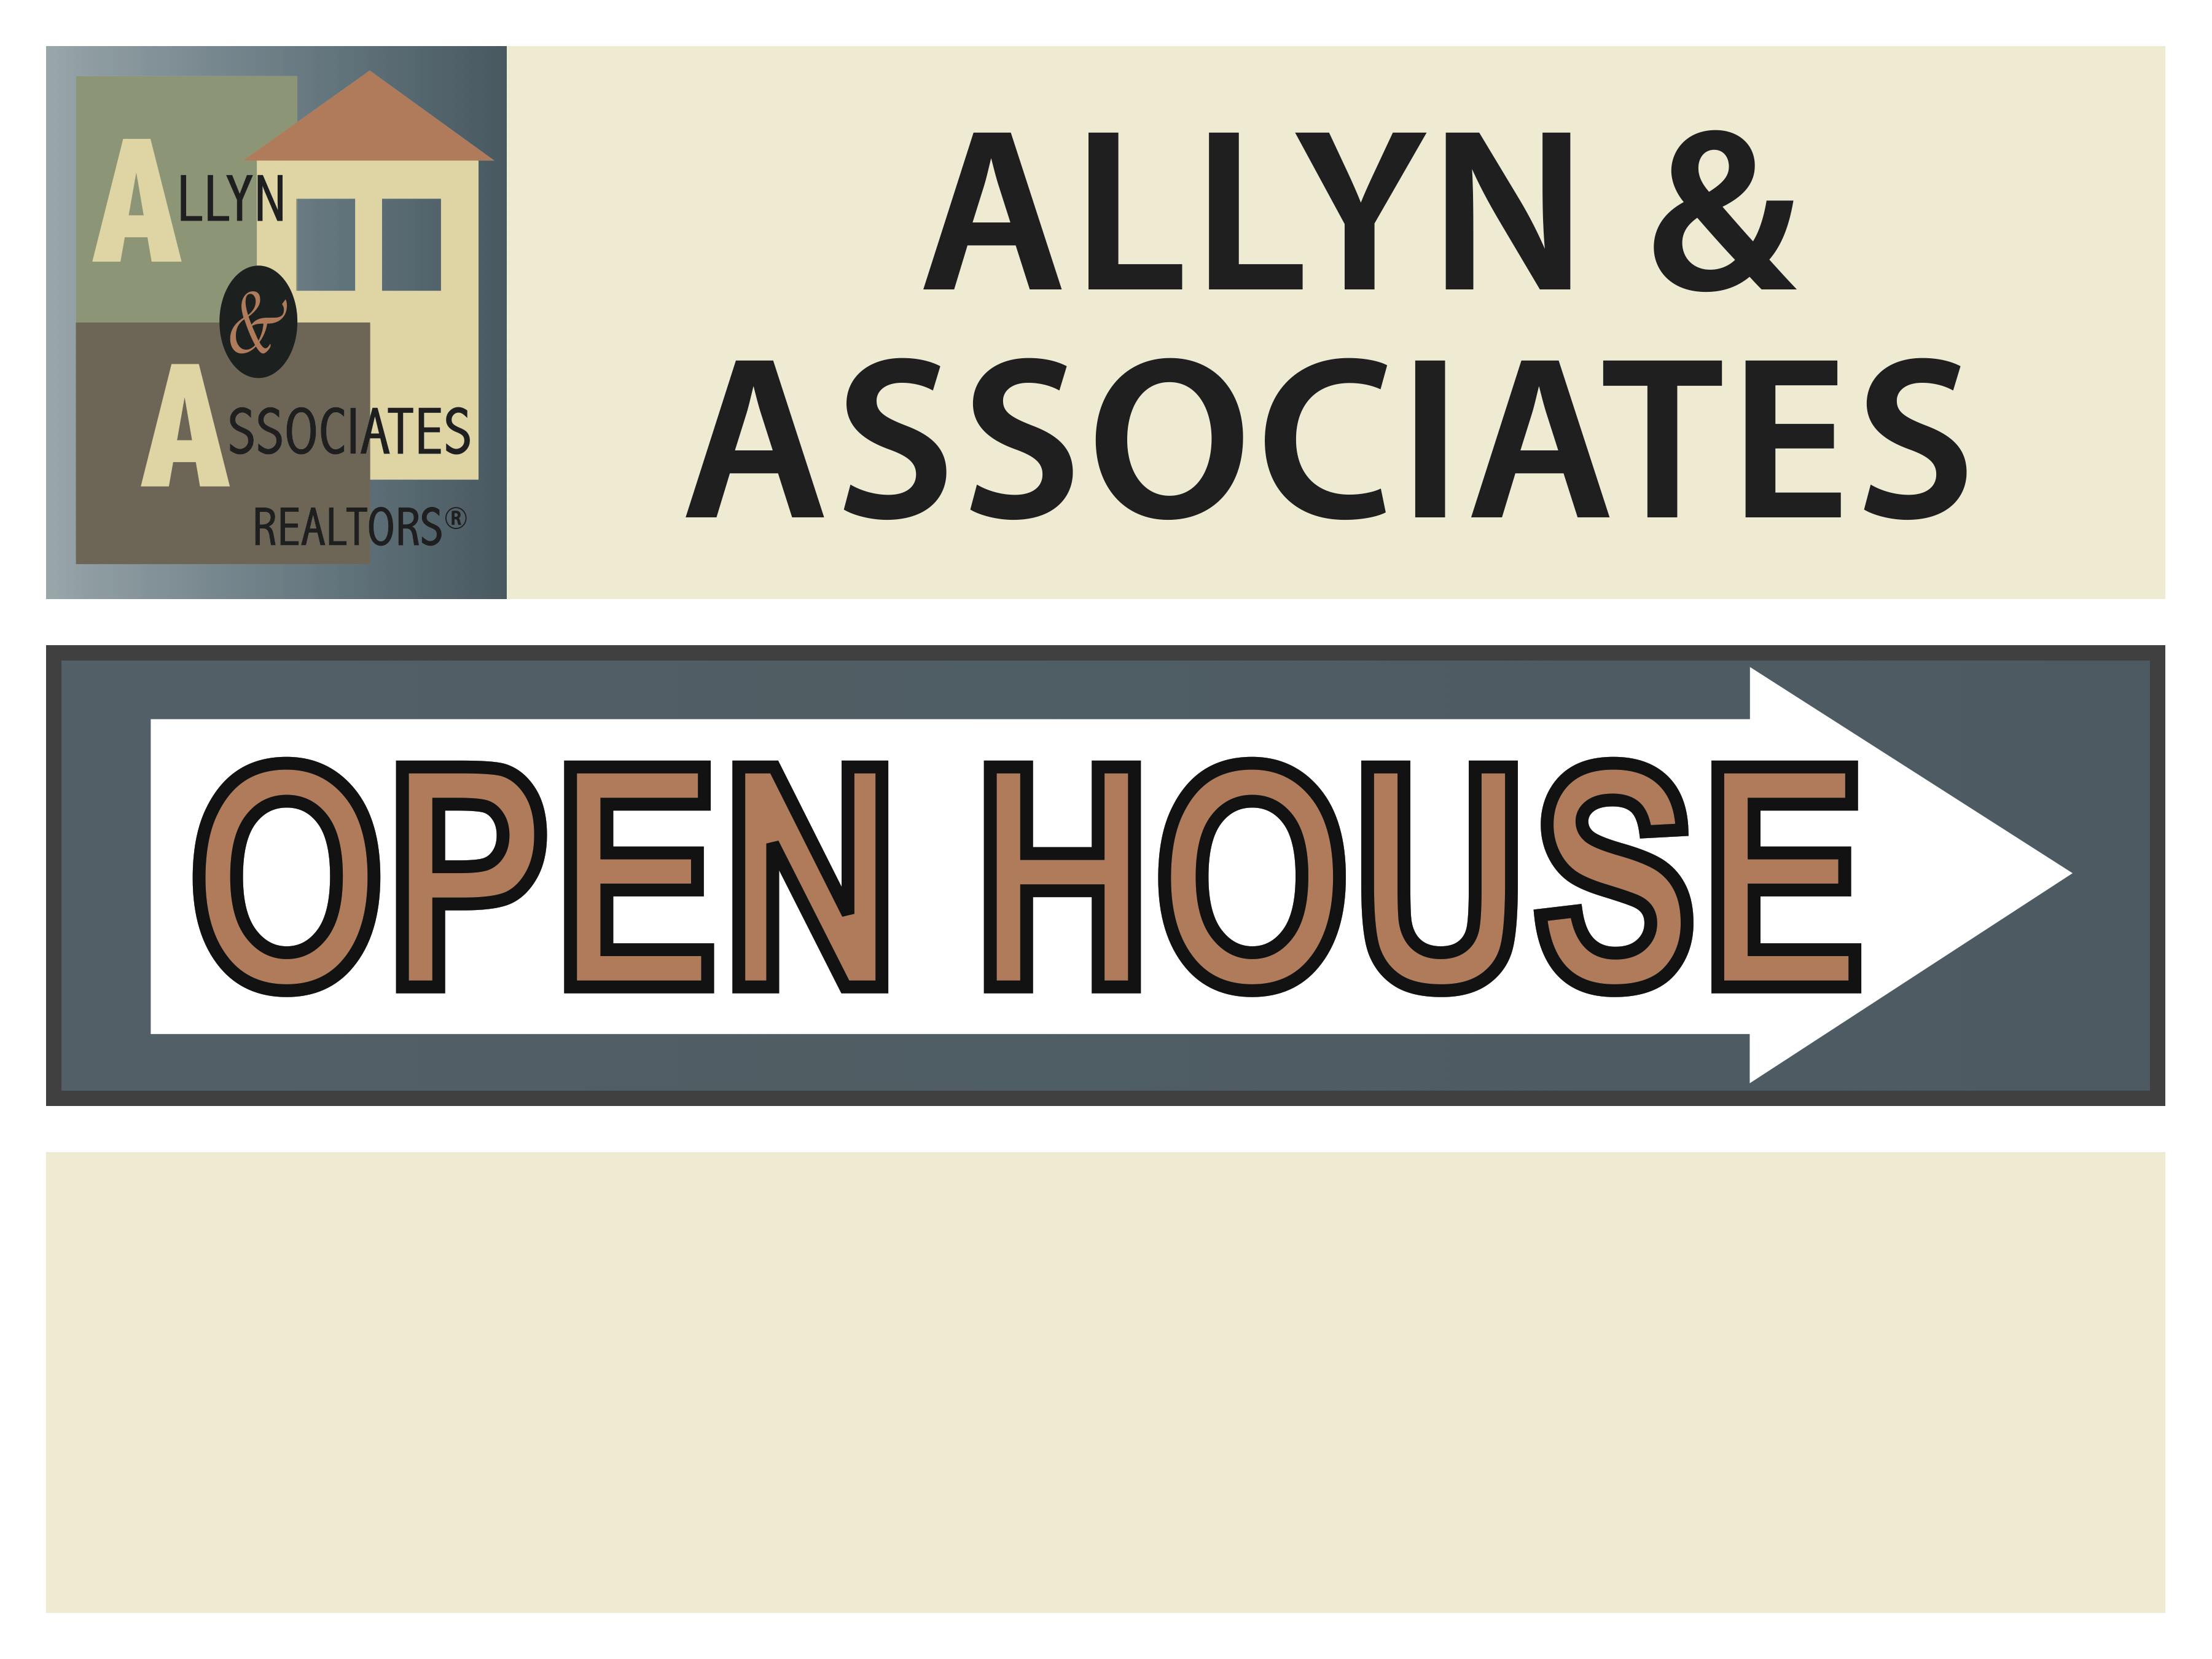 Open house signs for the Allyn Realty solution